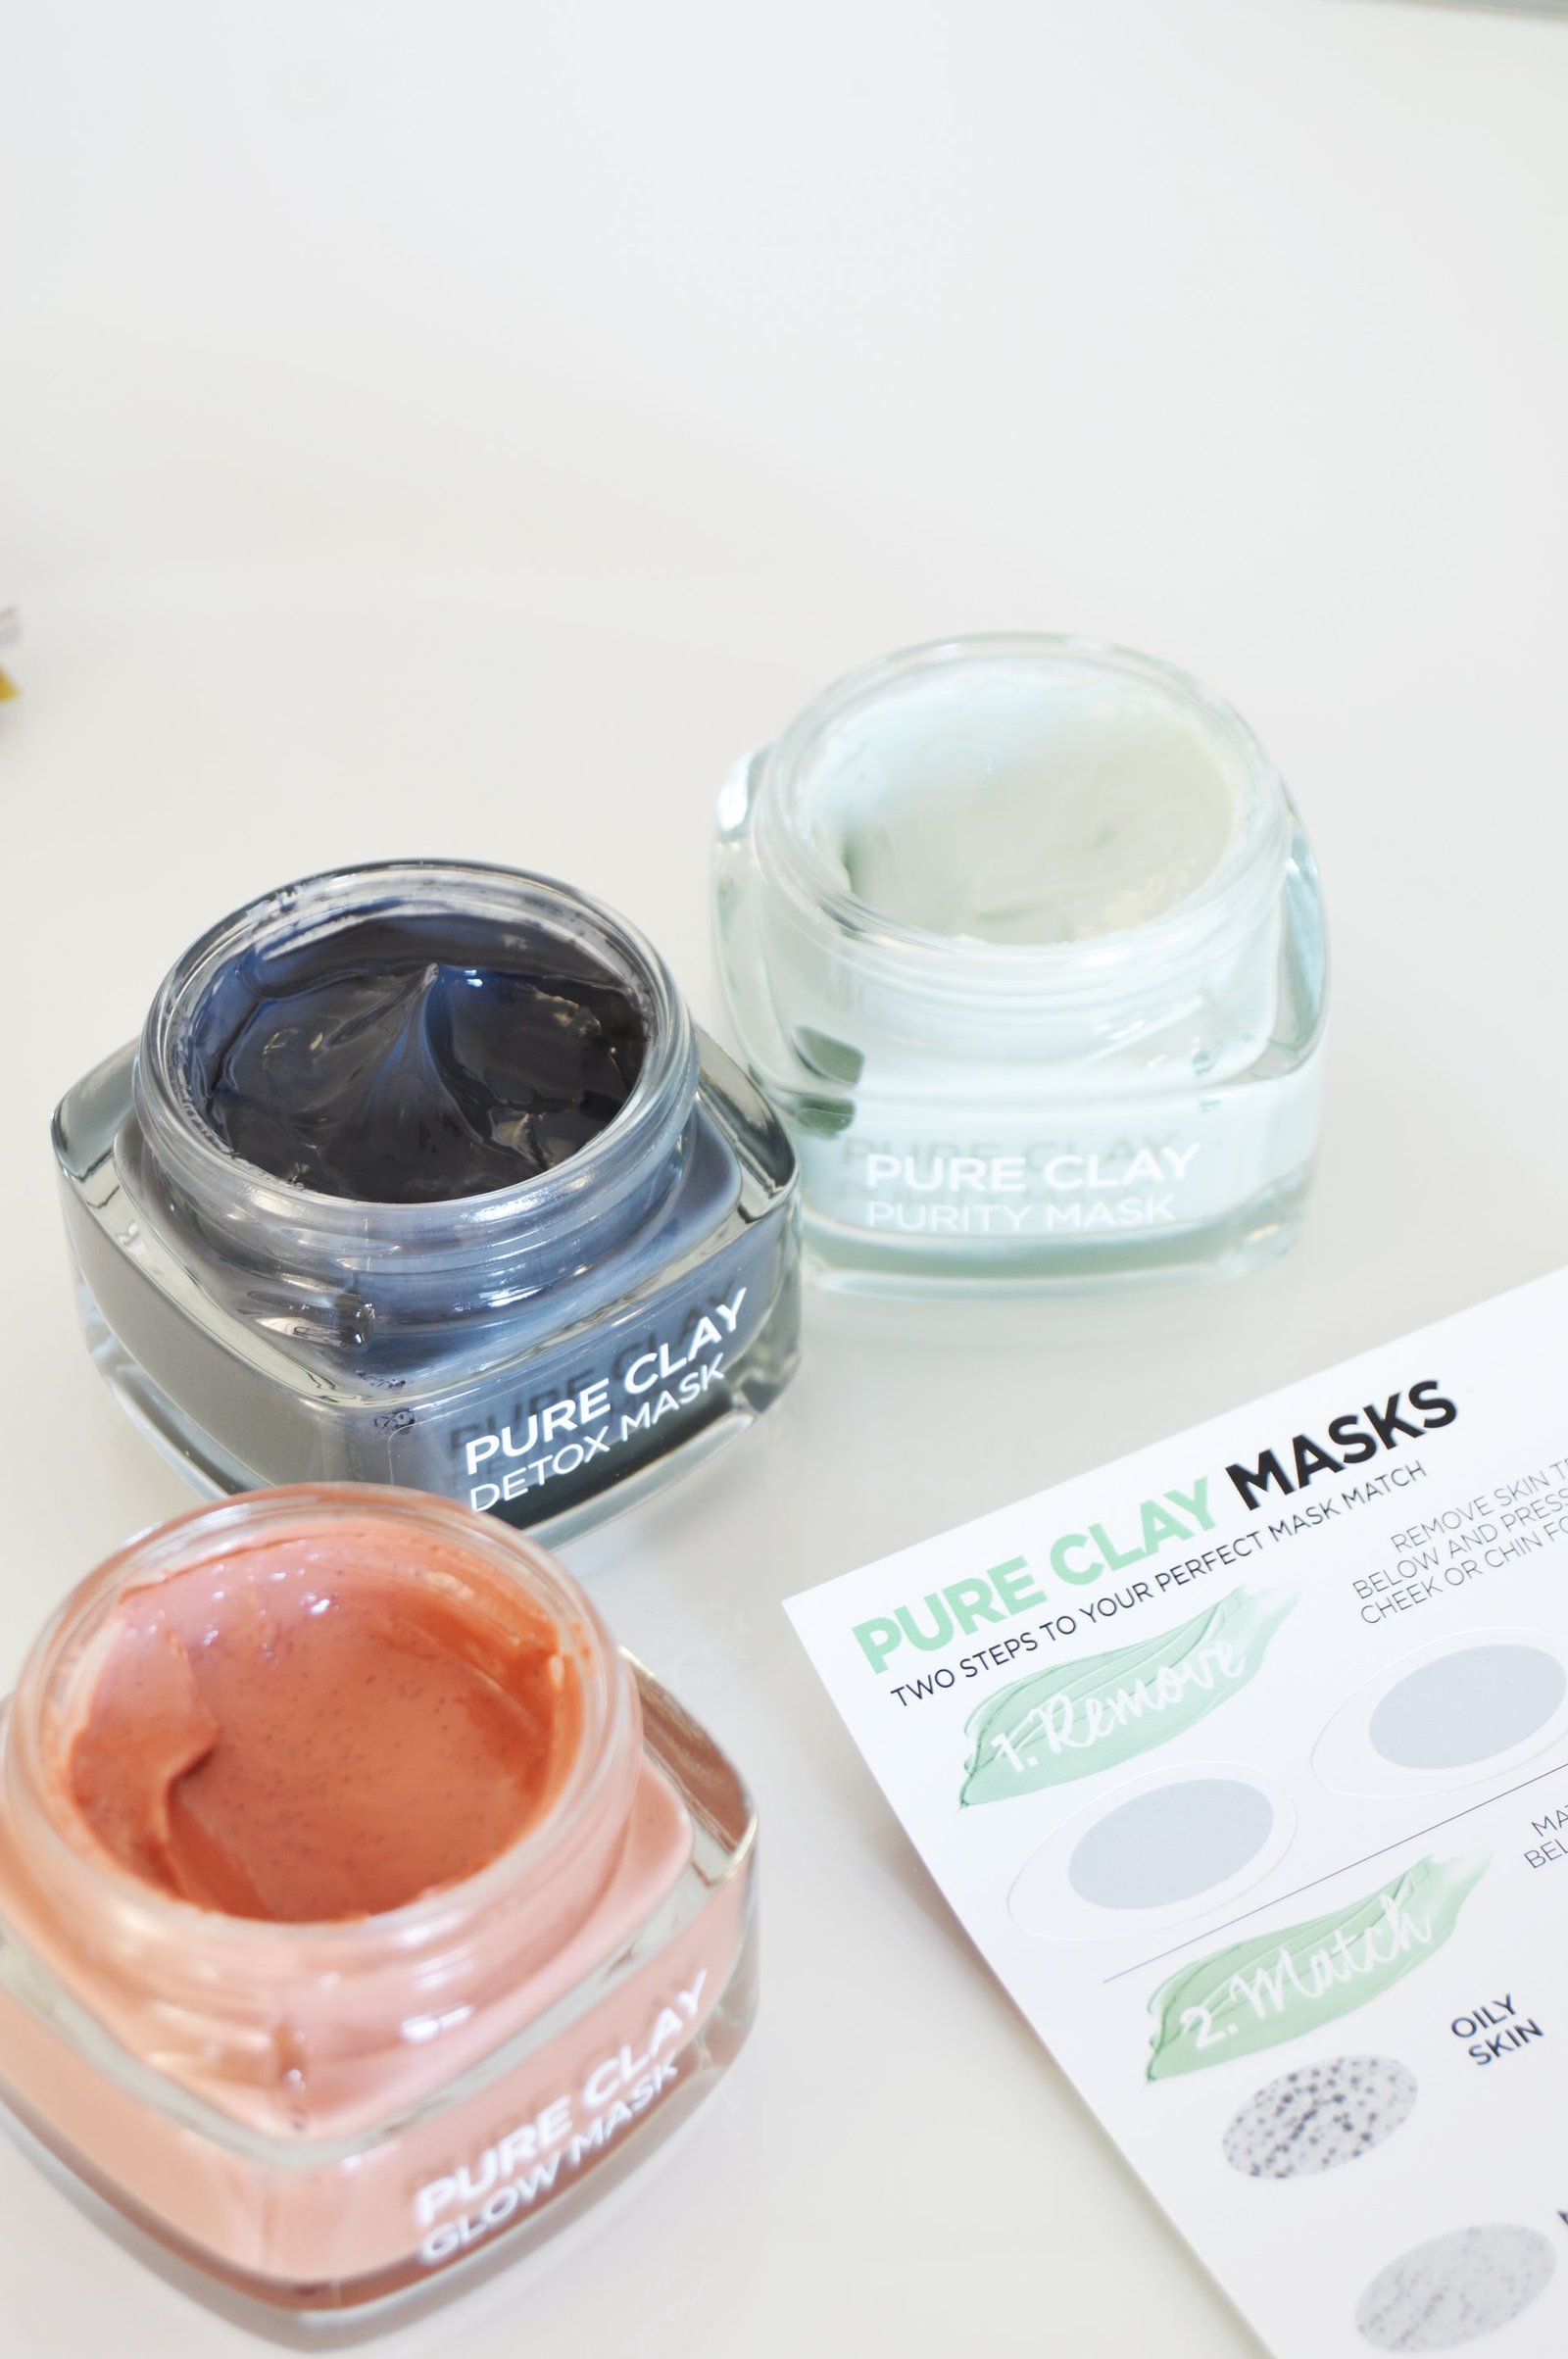 L'Oreal Pure Clay Masks - Detox, glow and purity masks claim to give you the brighter and softer looking skin and help you get rid of the impurities.